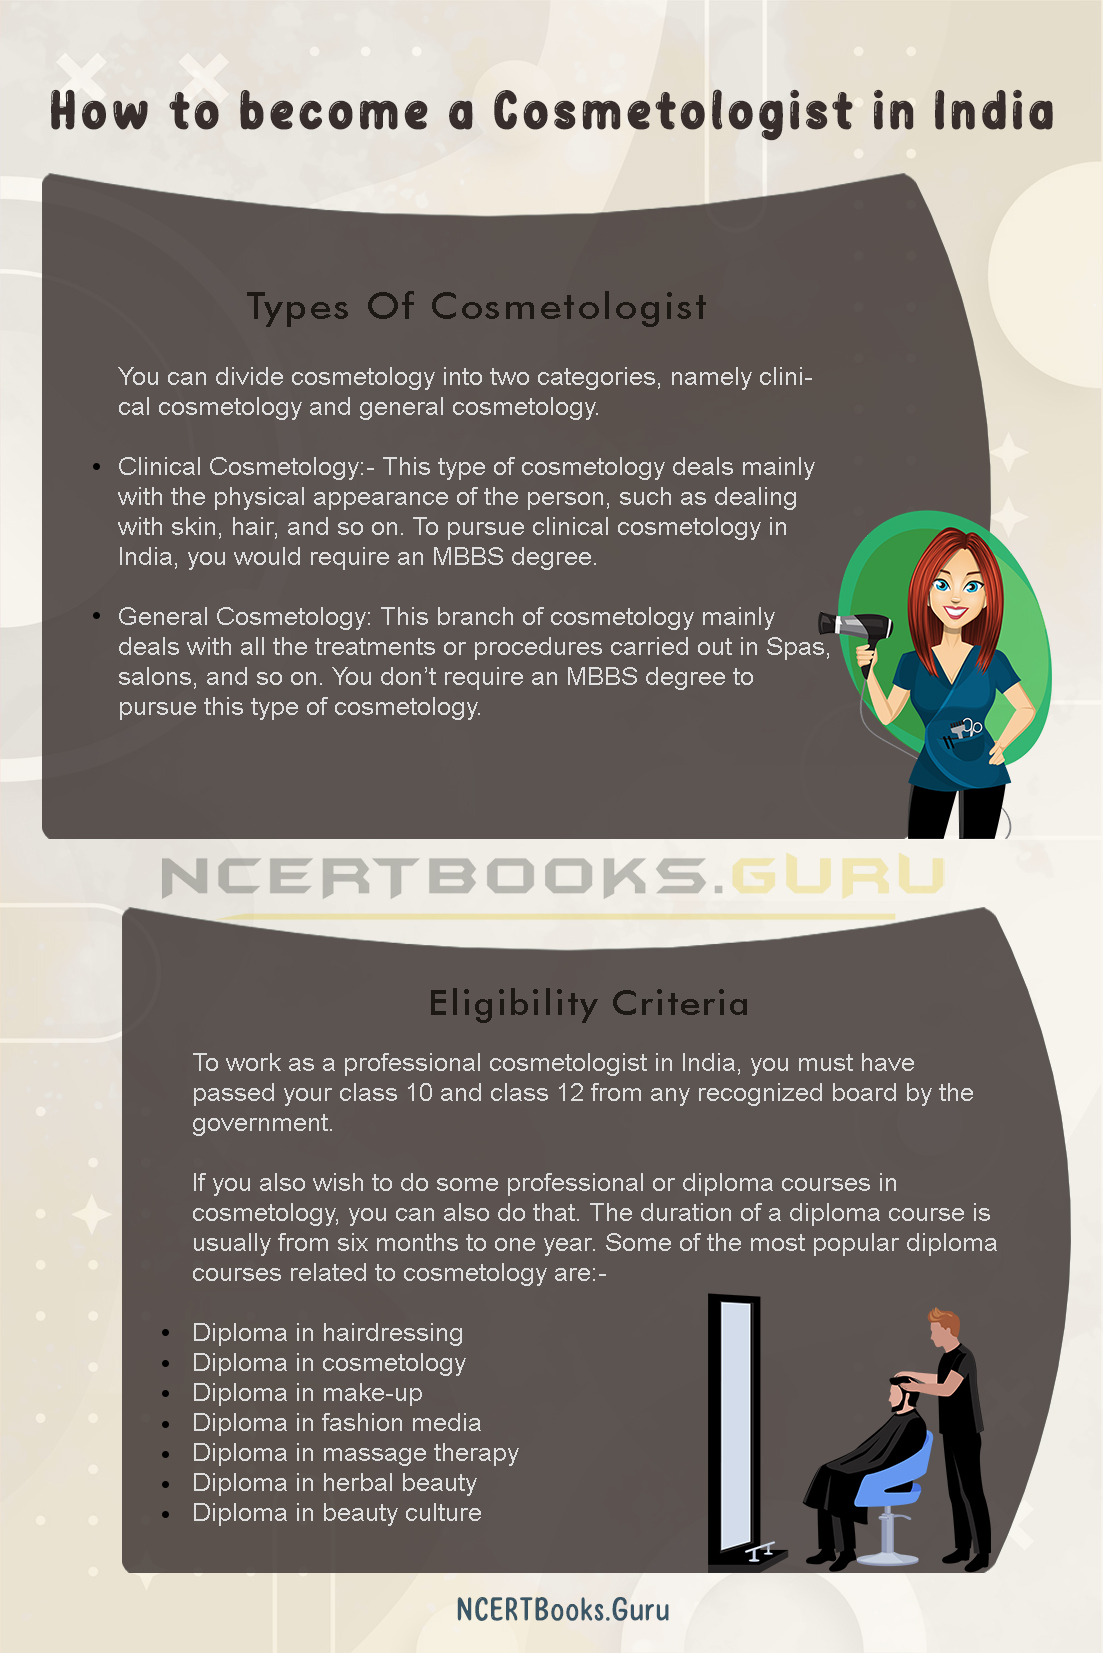 How to become a Cosmetologist in India 1